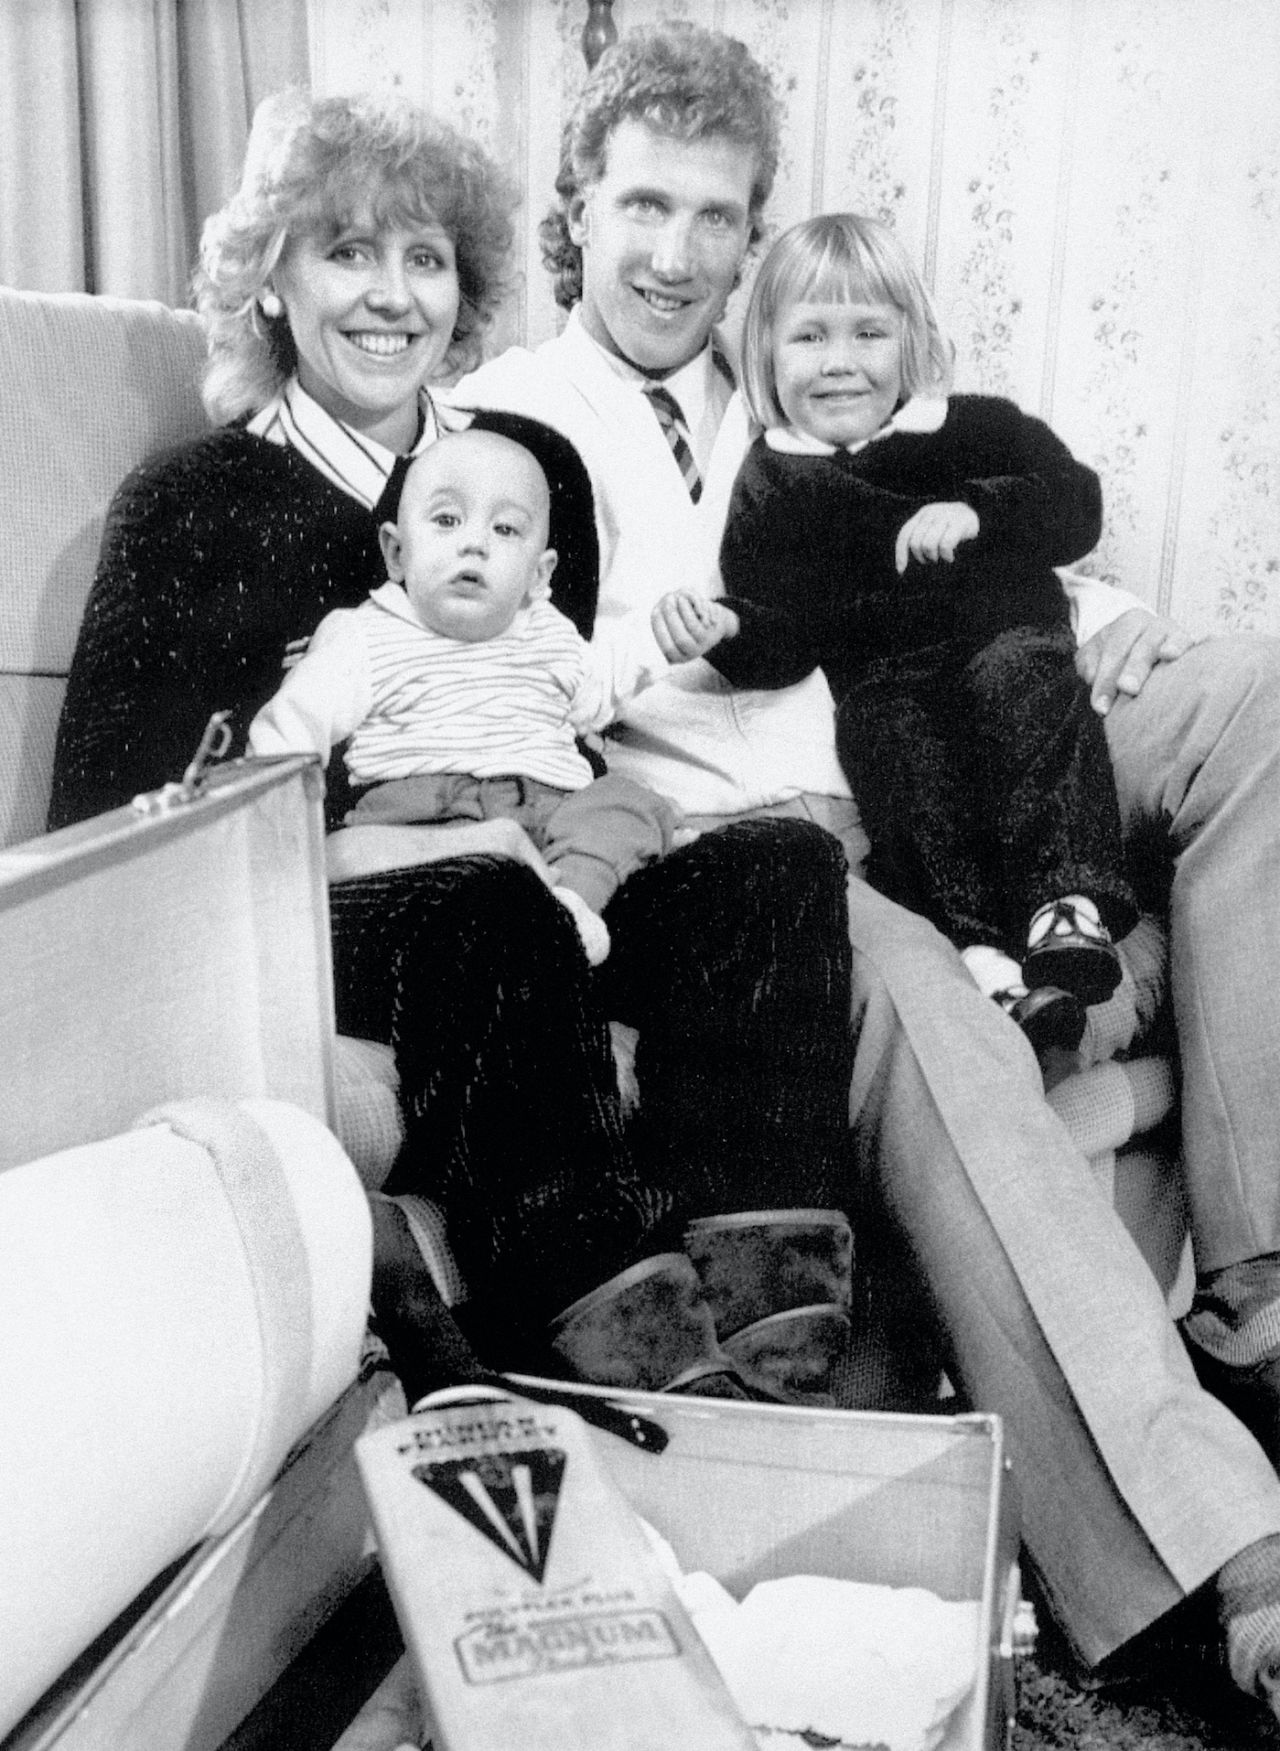 Chris Broad with his wife Carole and his children Stuart Broad and Gemma Broad, England, February 09, 1987